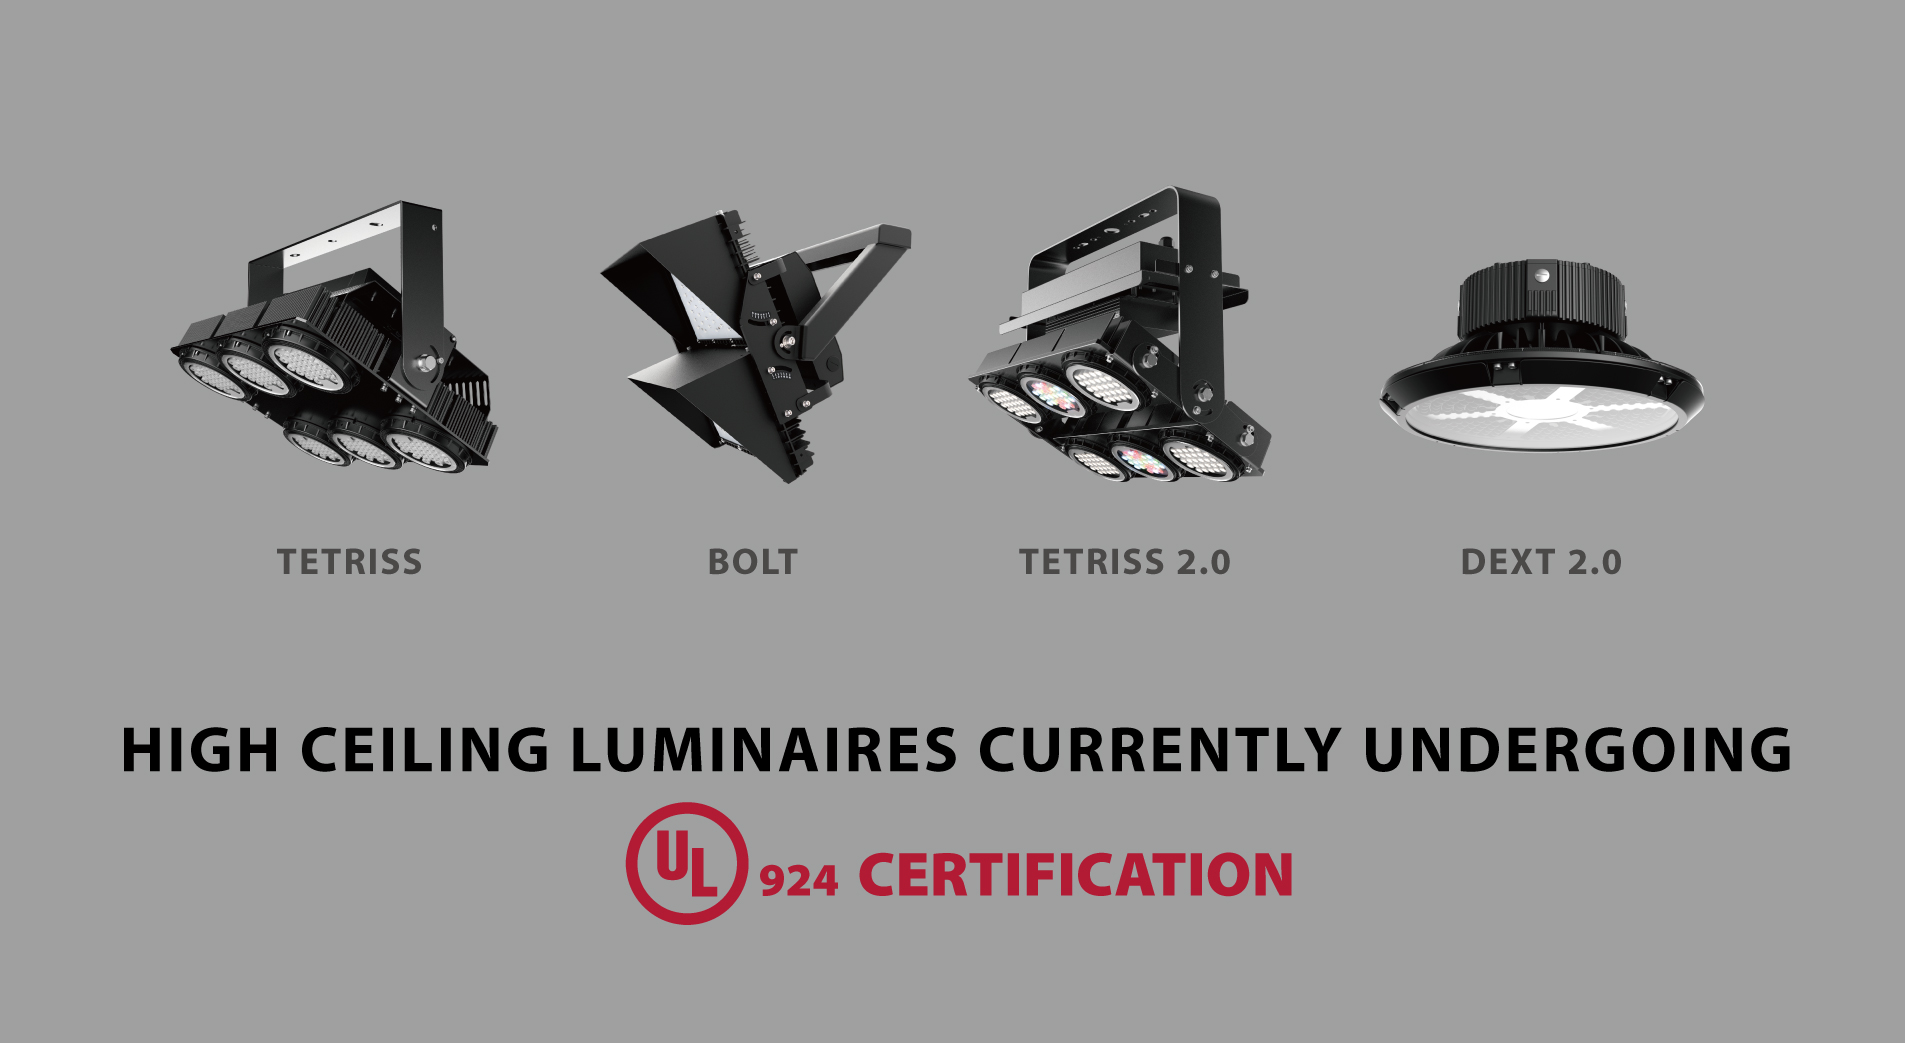 Meteor Lighting High Ceiling Luminaires are now UL 924 Certified